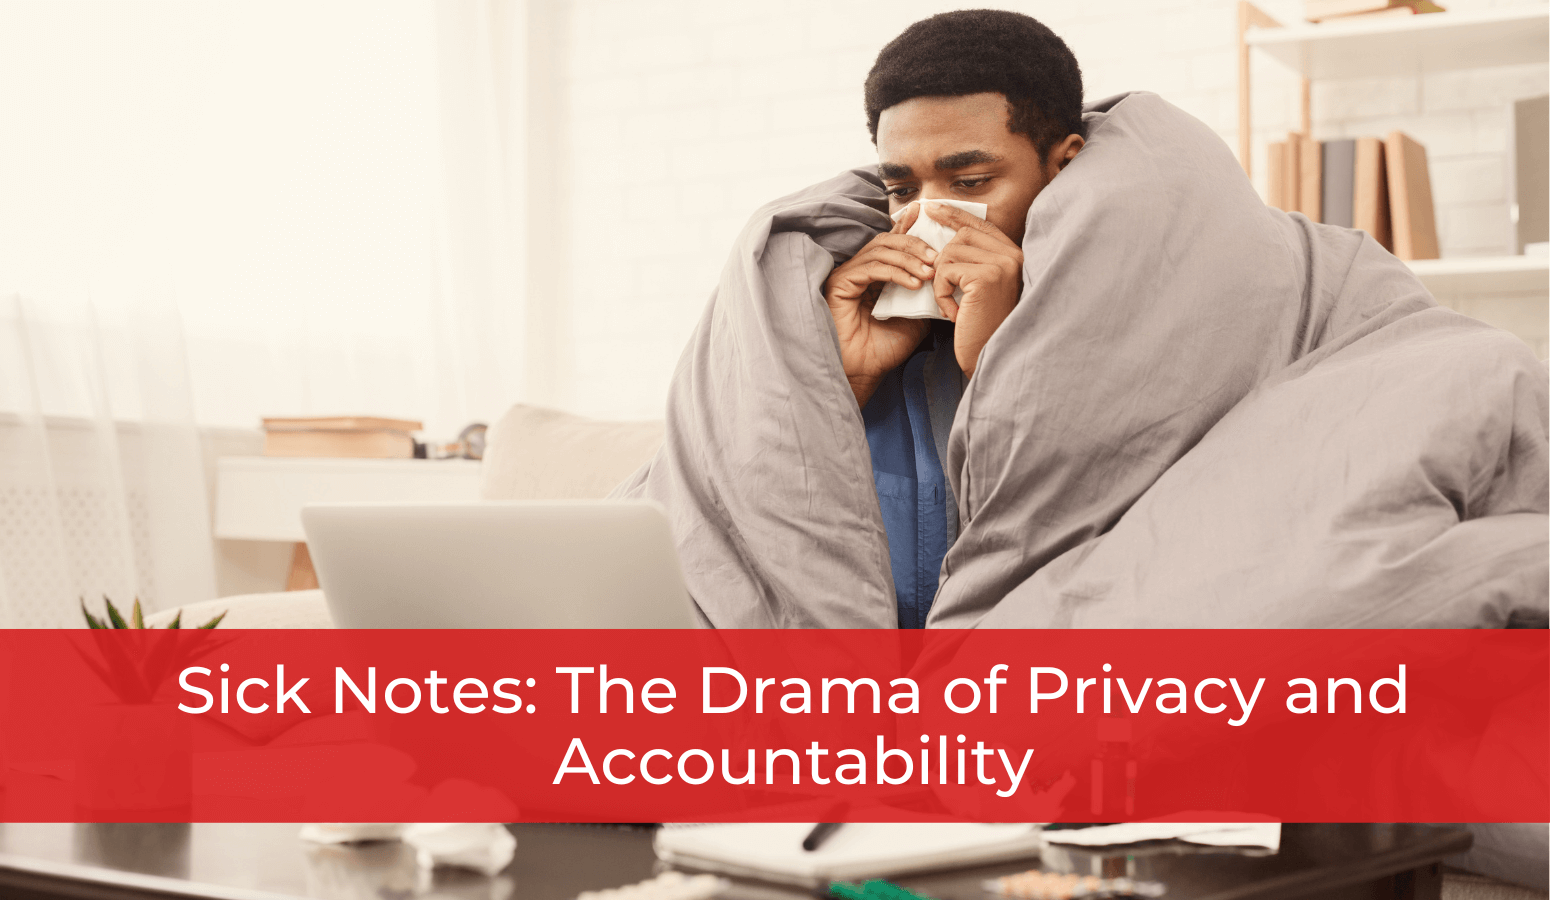 Featured image for “Sick Notes: The Drama of Privacy and Accountability”